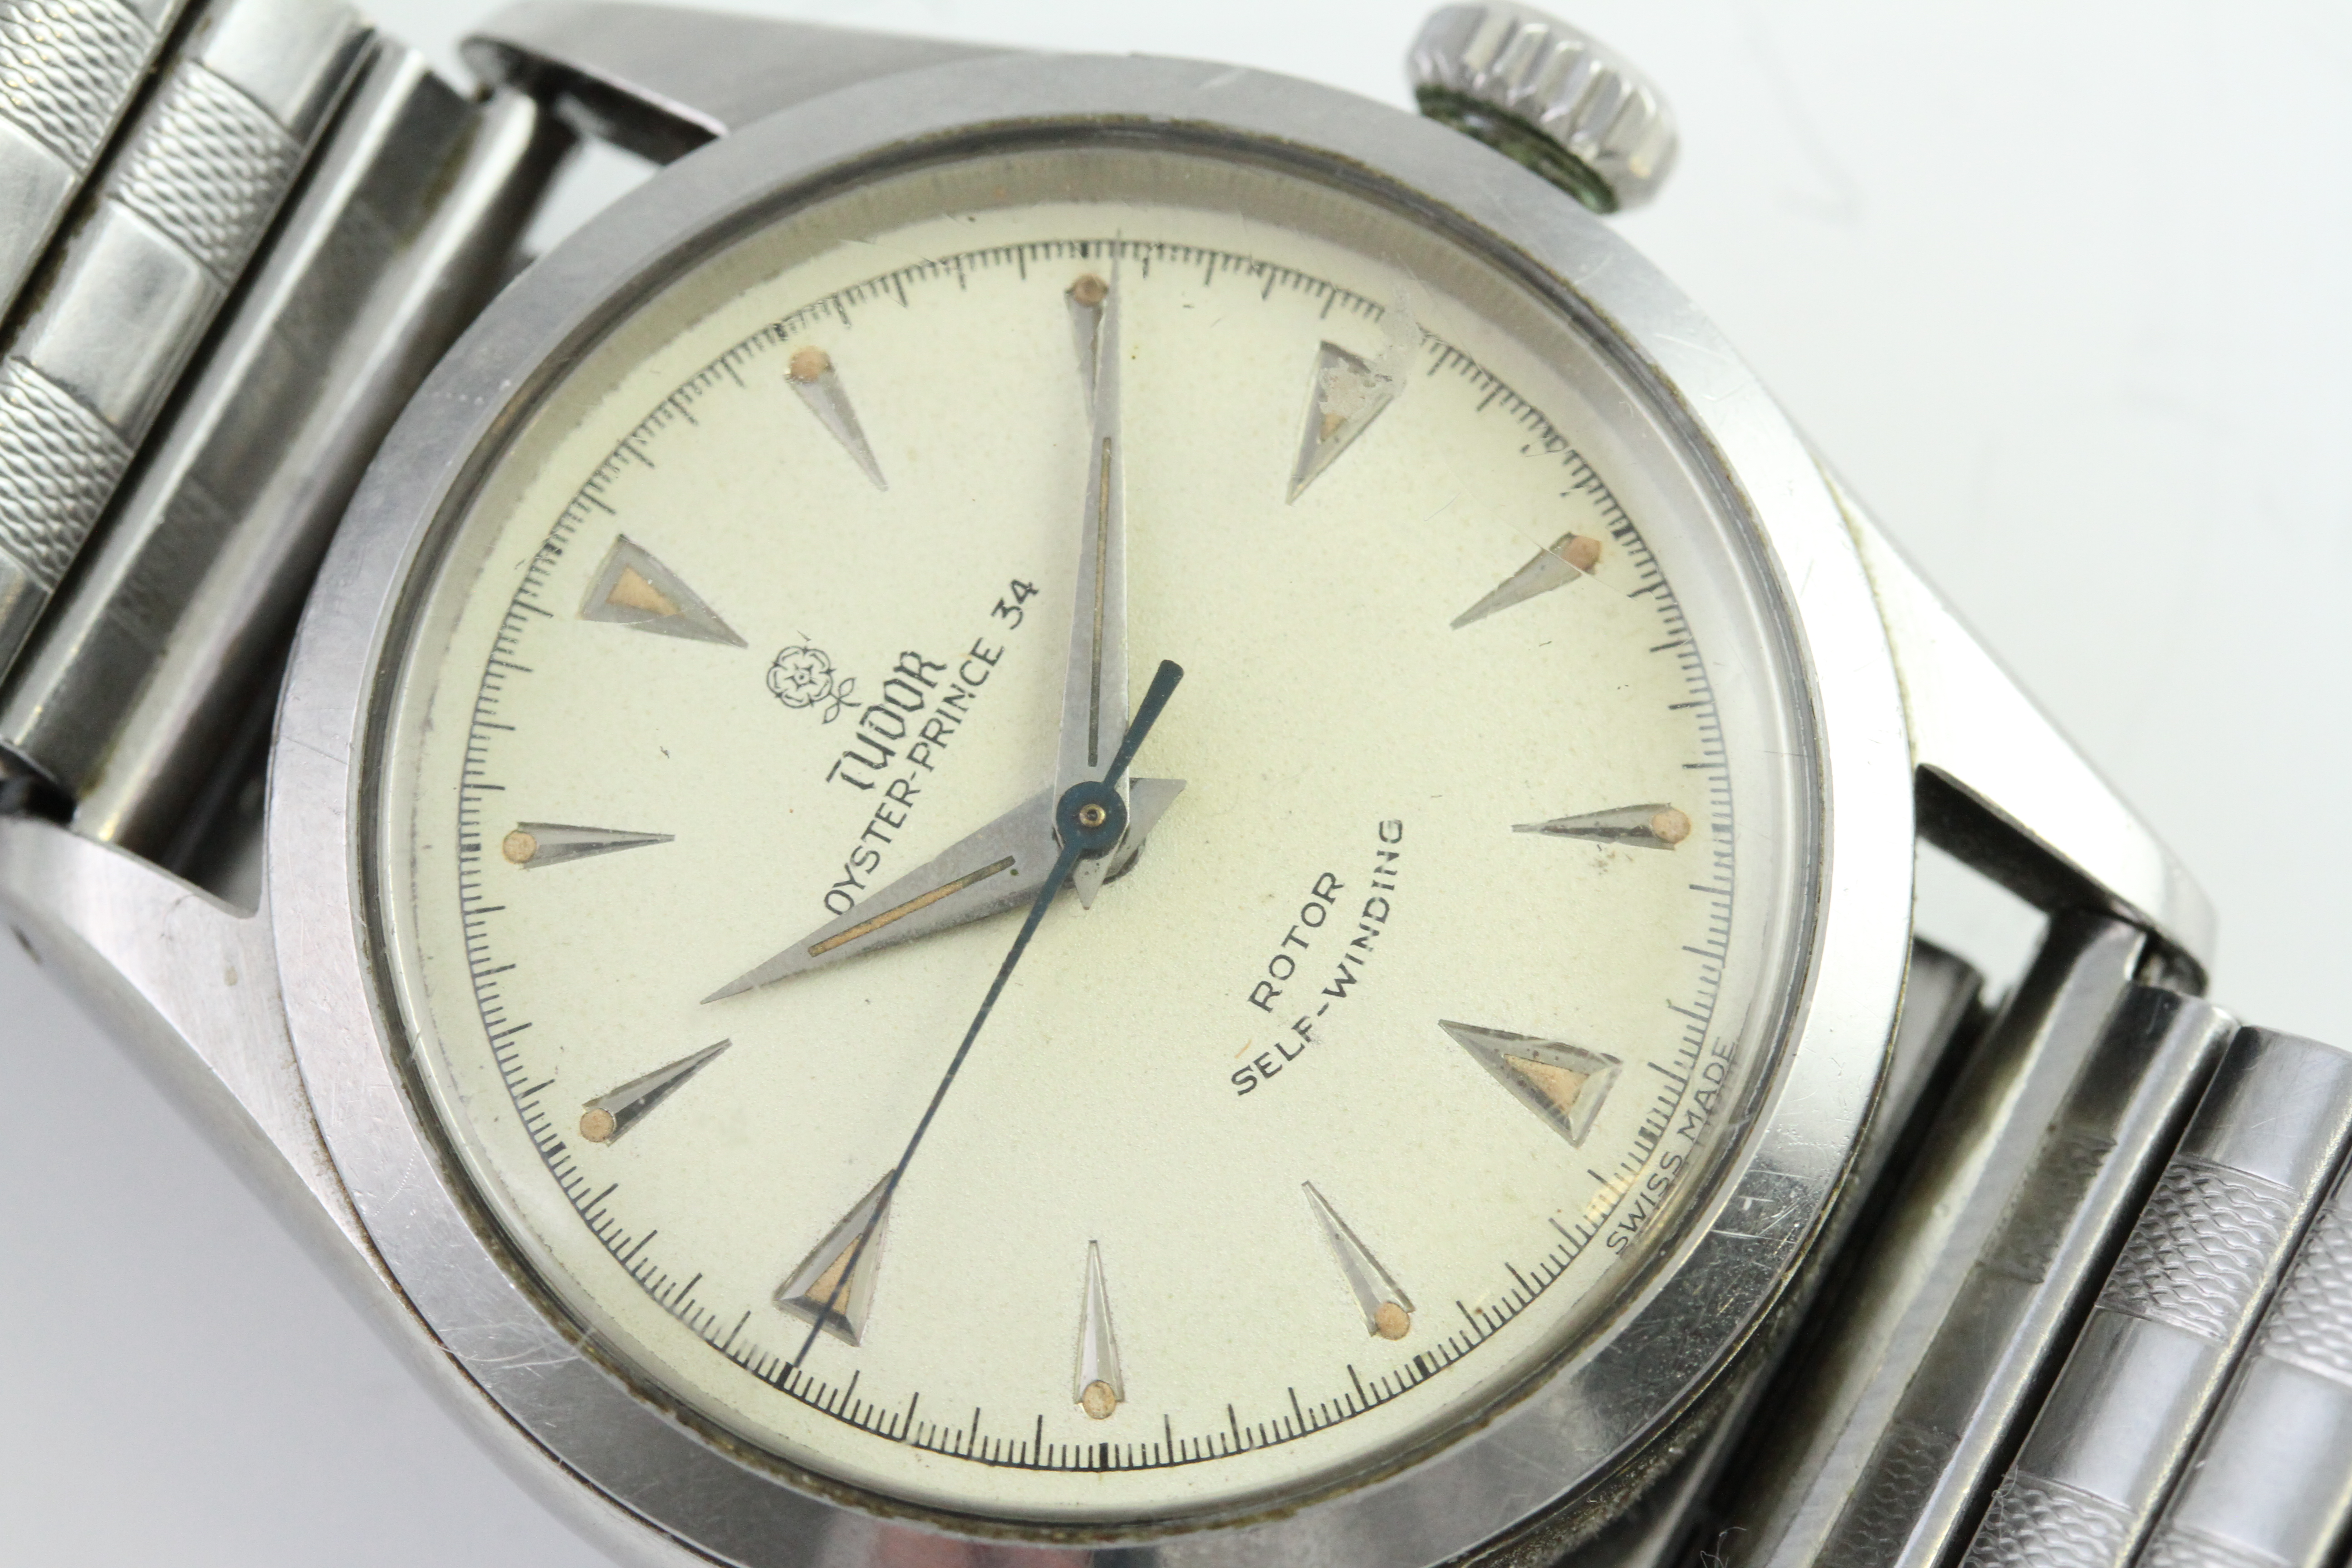 VINTAGE TUDOR OYSTER PRINCE 34 REFERENCE 7909, cream dial with dagger lume'd hour markers, outer - Image 2 of 4